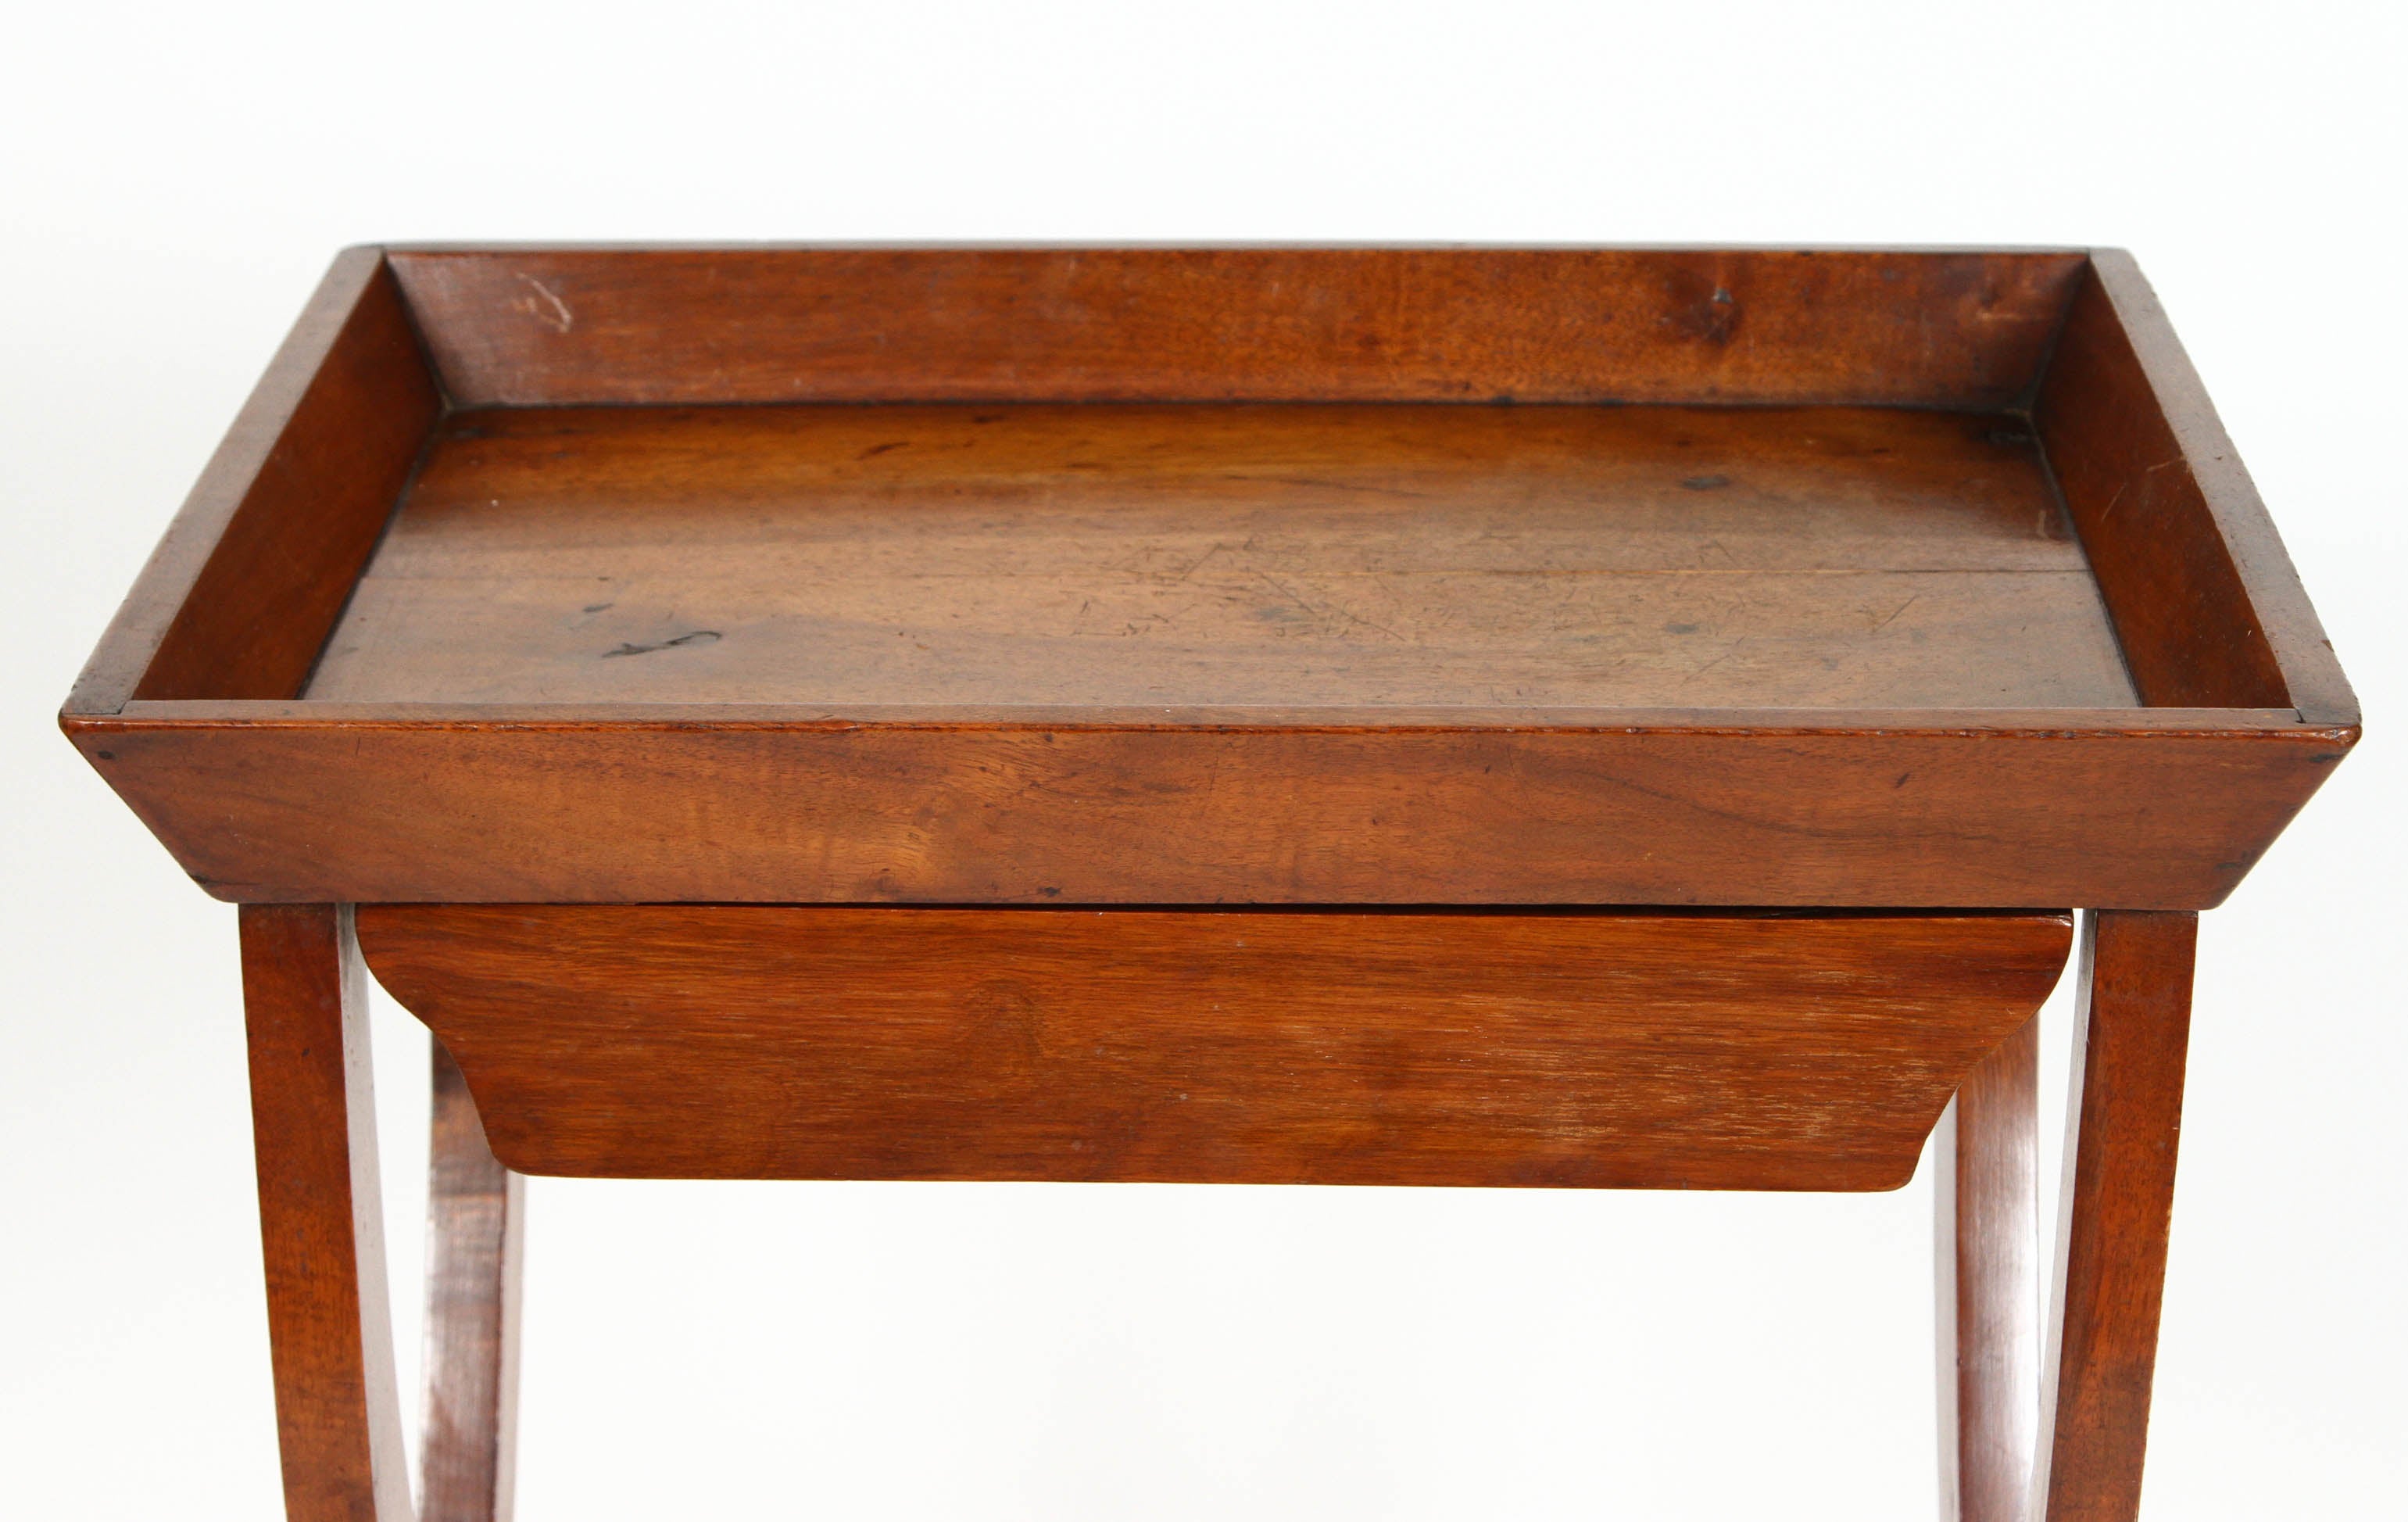 Try top table with drawer and Biedermeier inspired leg design.